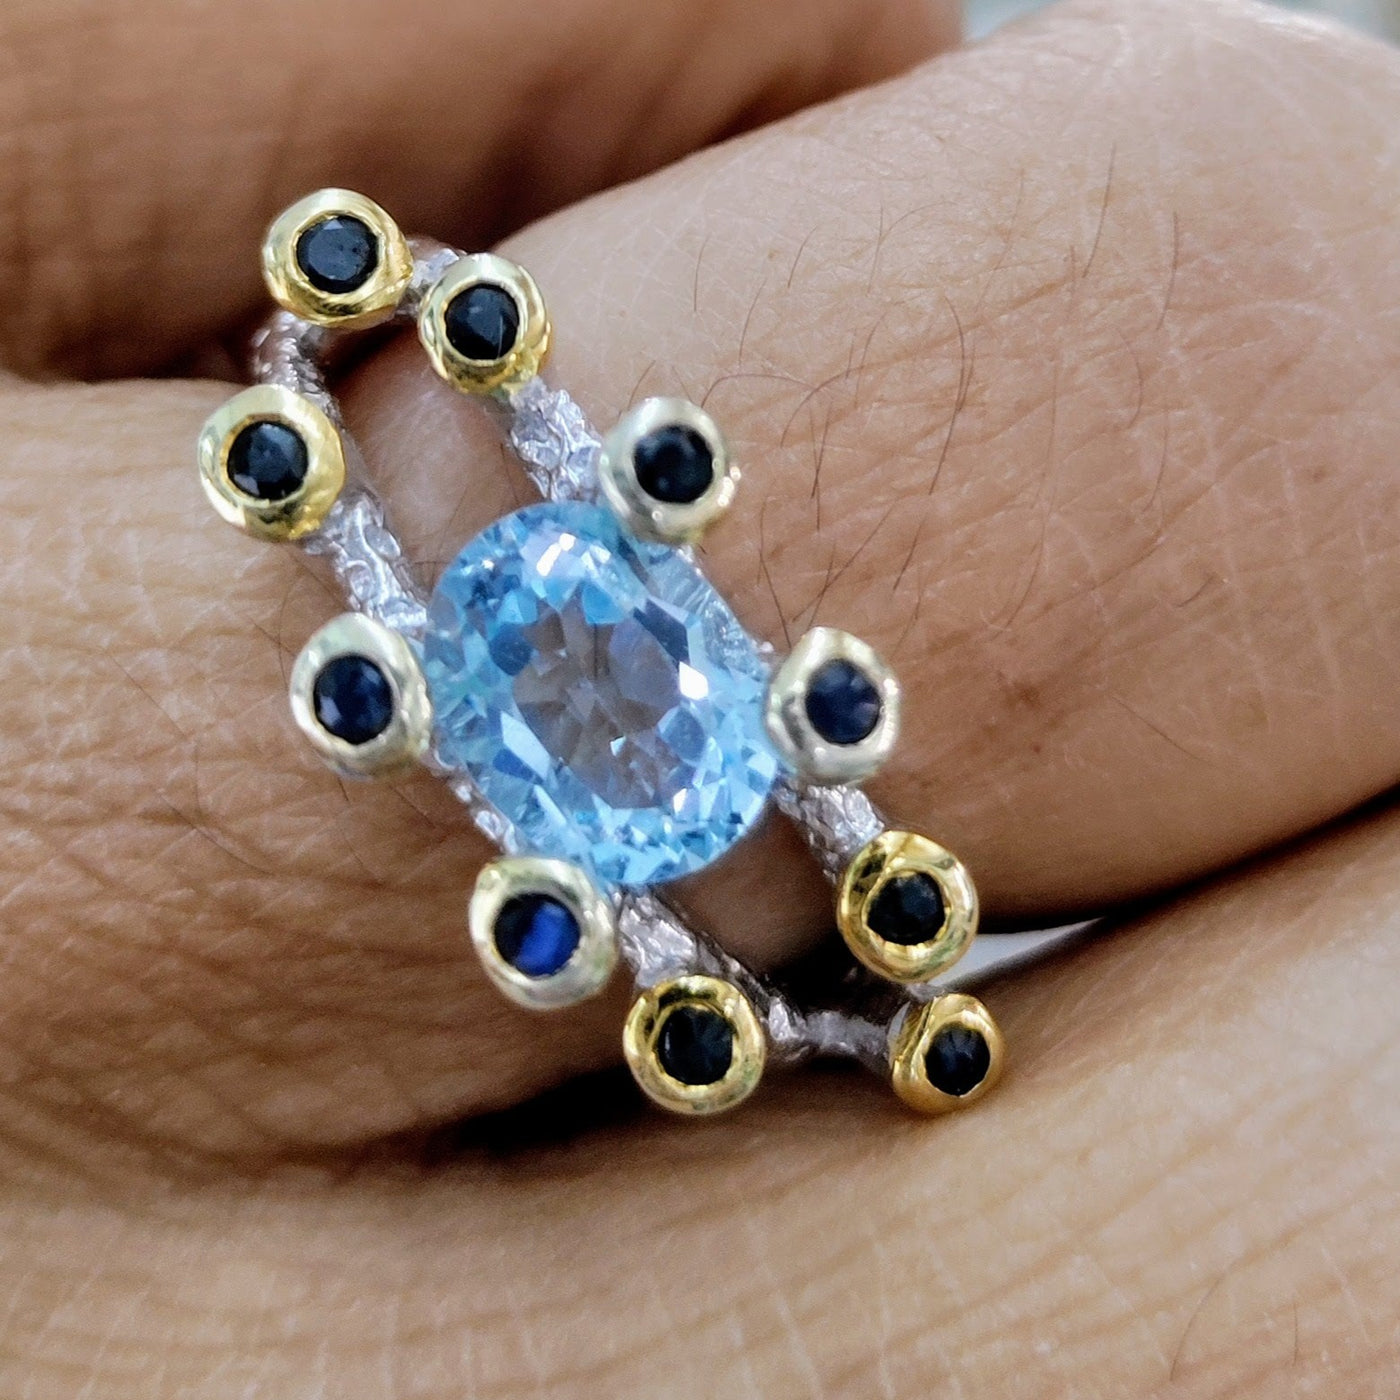 "The Jellyfish" Sz 7 Ring - Sapphire and Sky Blue Topaz